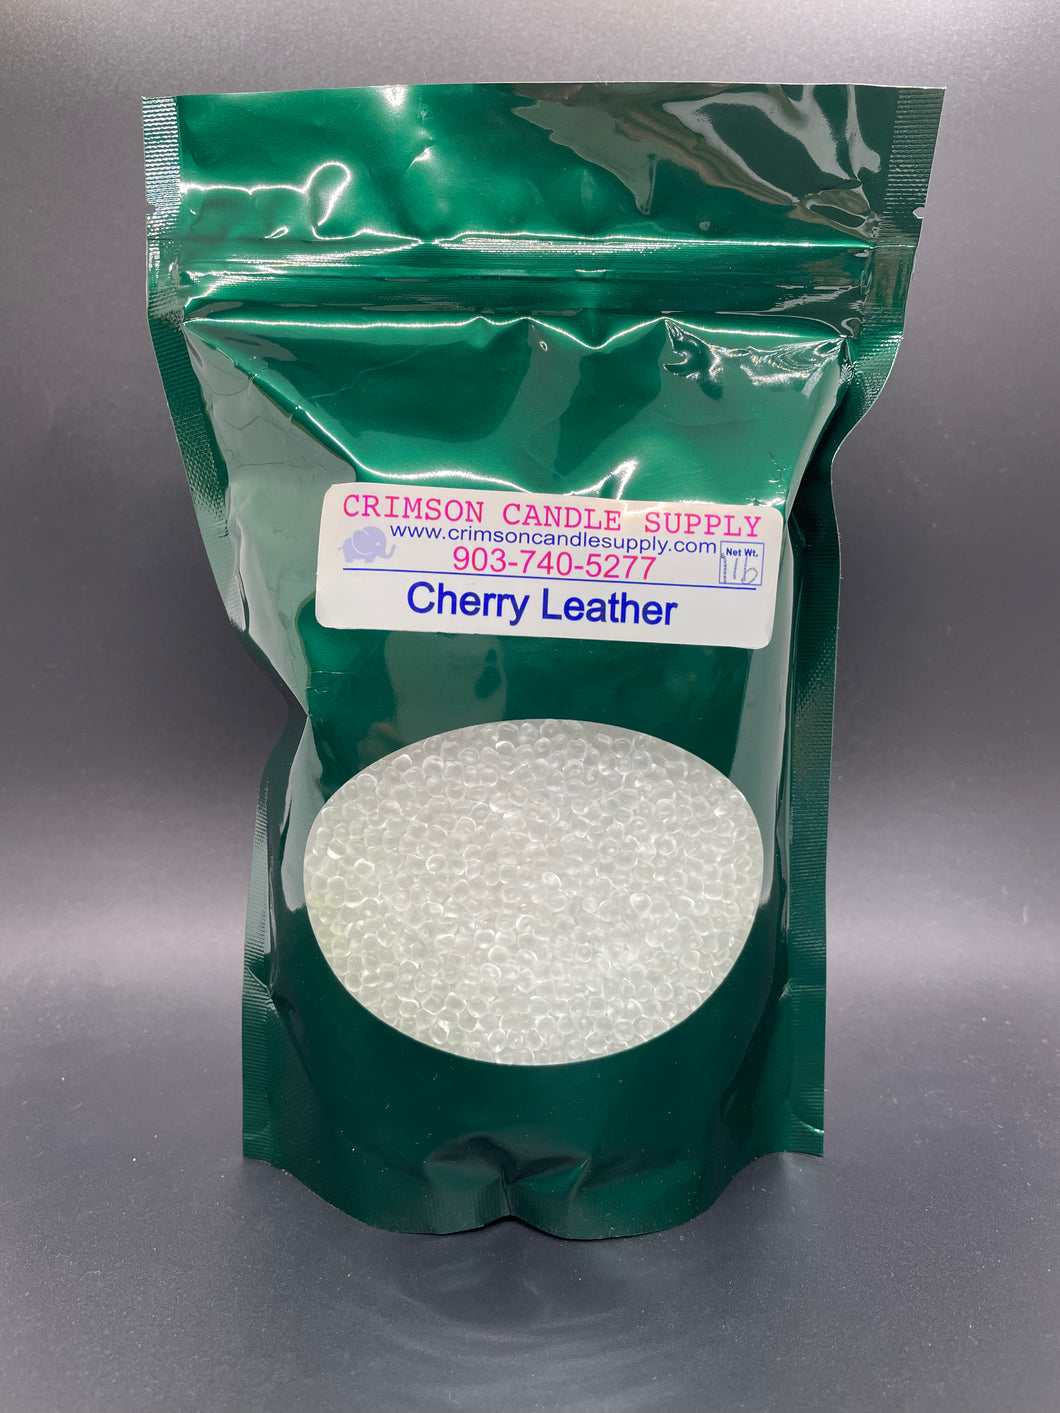 Cherry Leather Scented Aroma Beads 16 oz. Bag